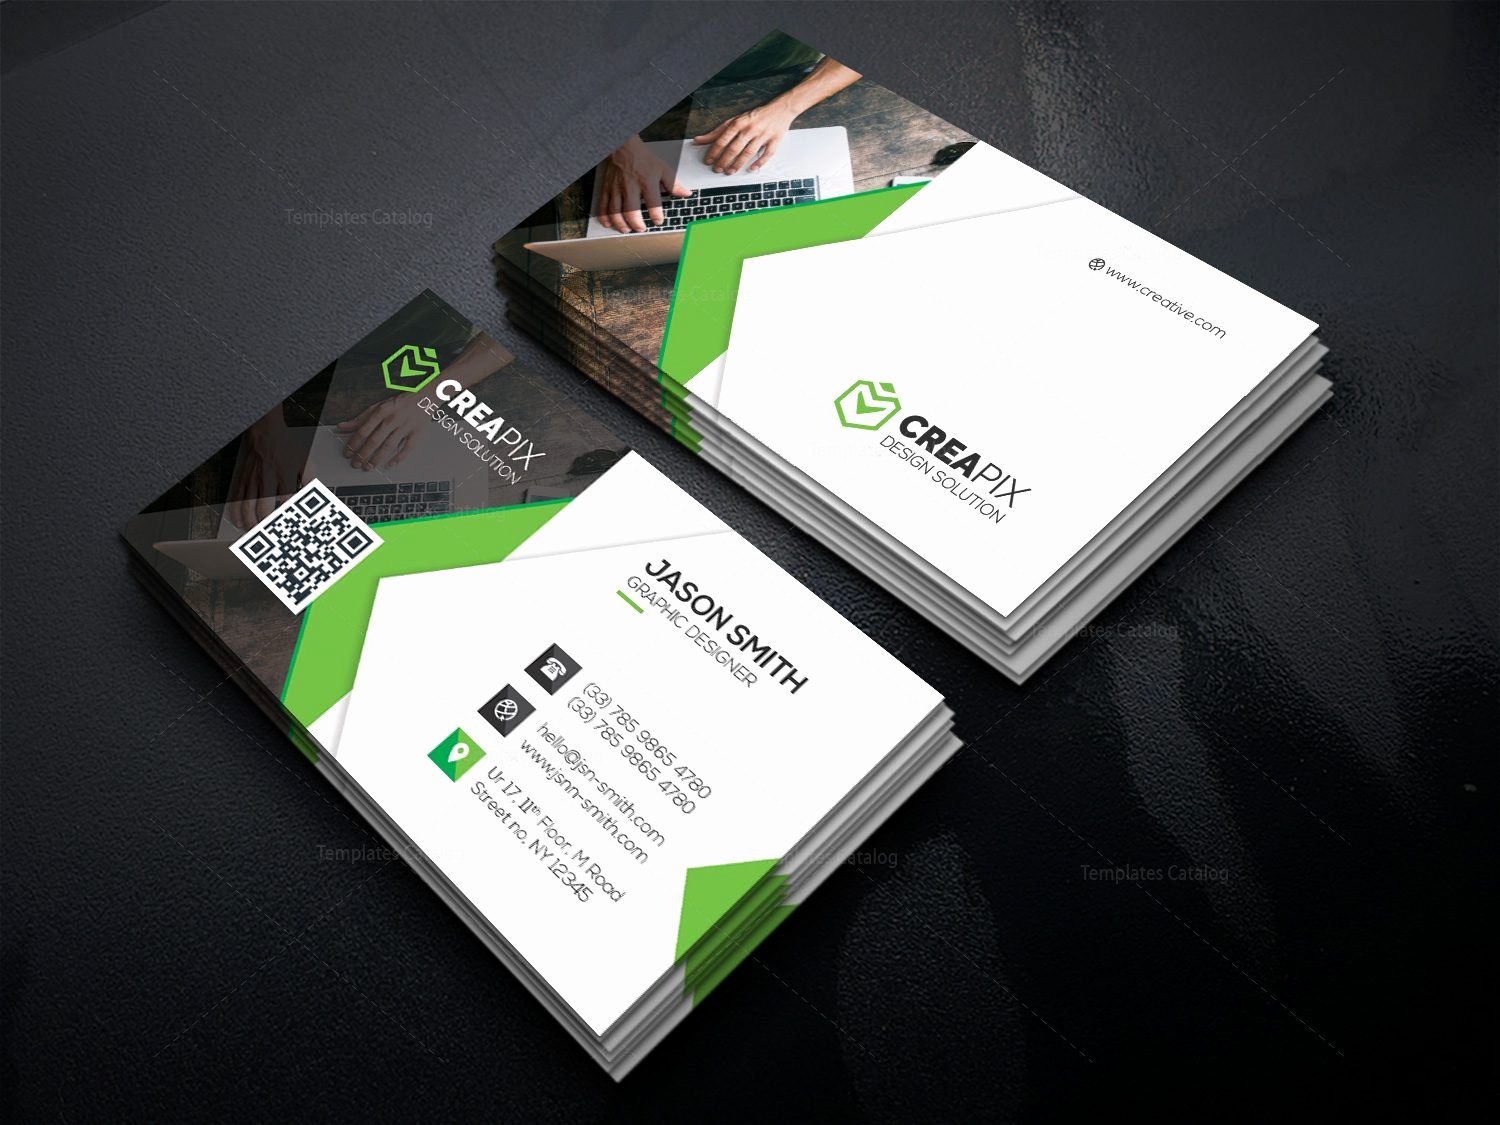 Personal Business Cards Template Beautiful Personal Business Card Template Template Catalog